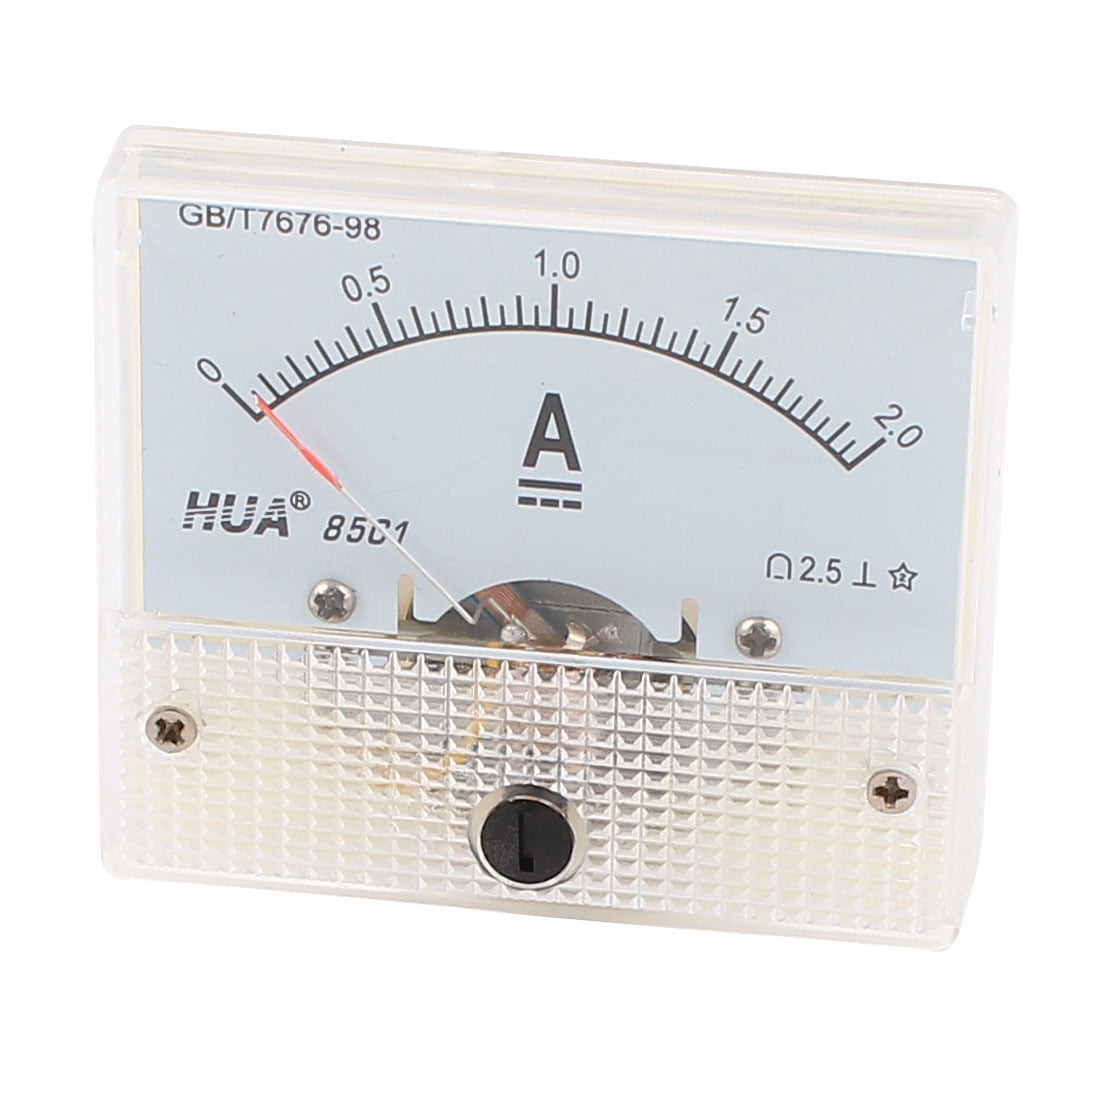 uxcell 85C1-A Analog Current Panel Meter DC 100A Ammeter for Circuit Testing Ampere Tester Gauge 1 PCS